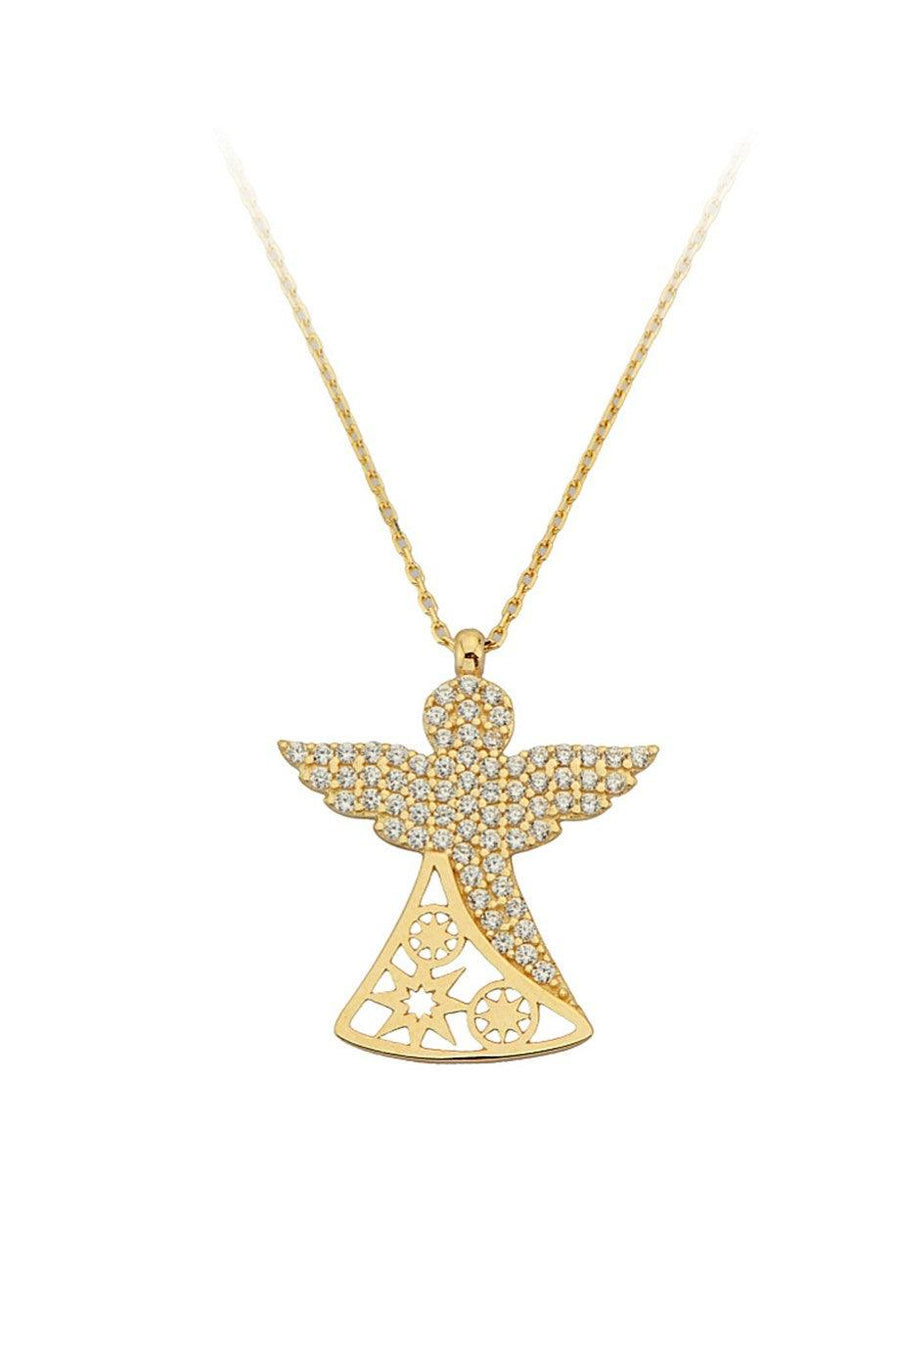 Gold Angel Necklace